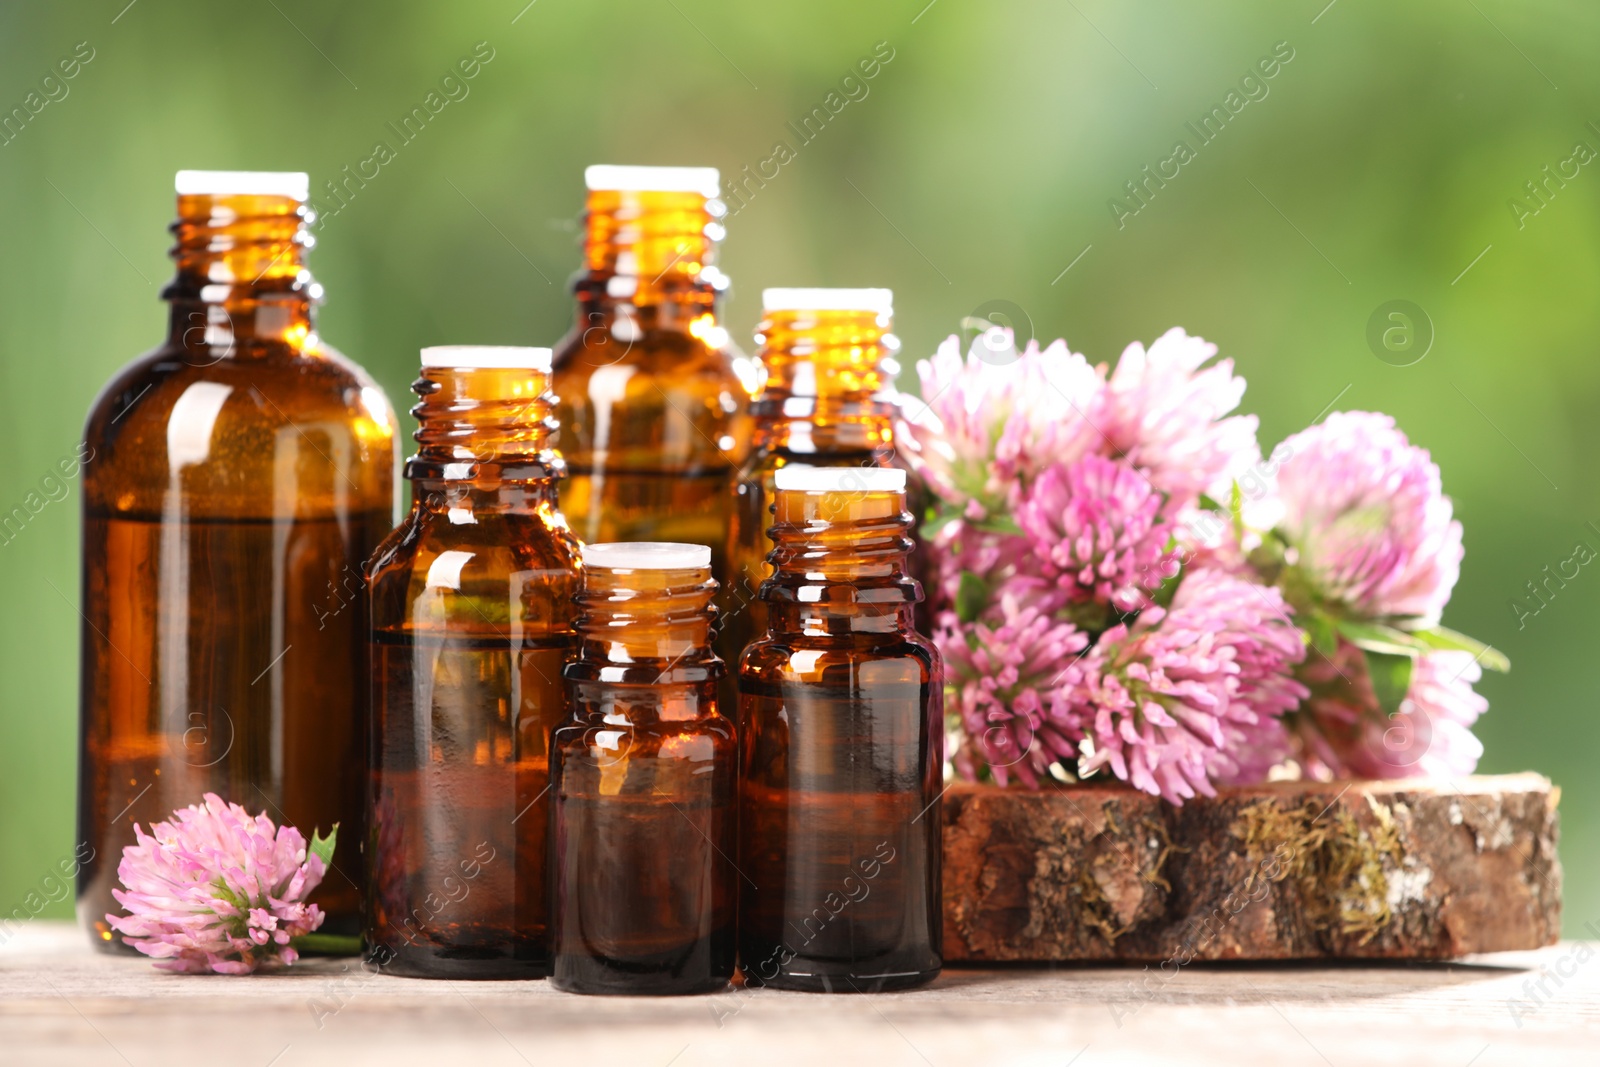 Photo of Bottles with essential oil and clover flowers on wooden table against blurred green background, closeup